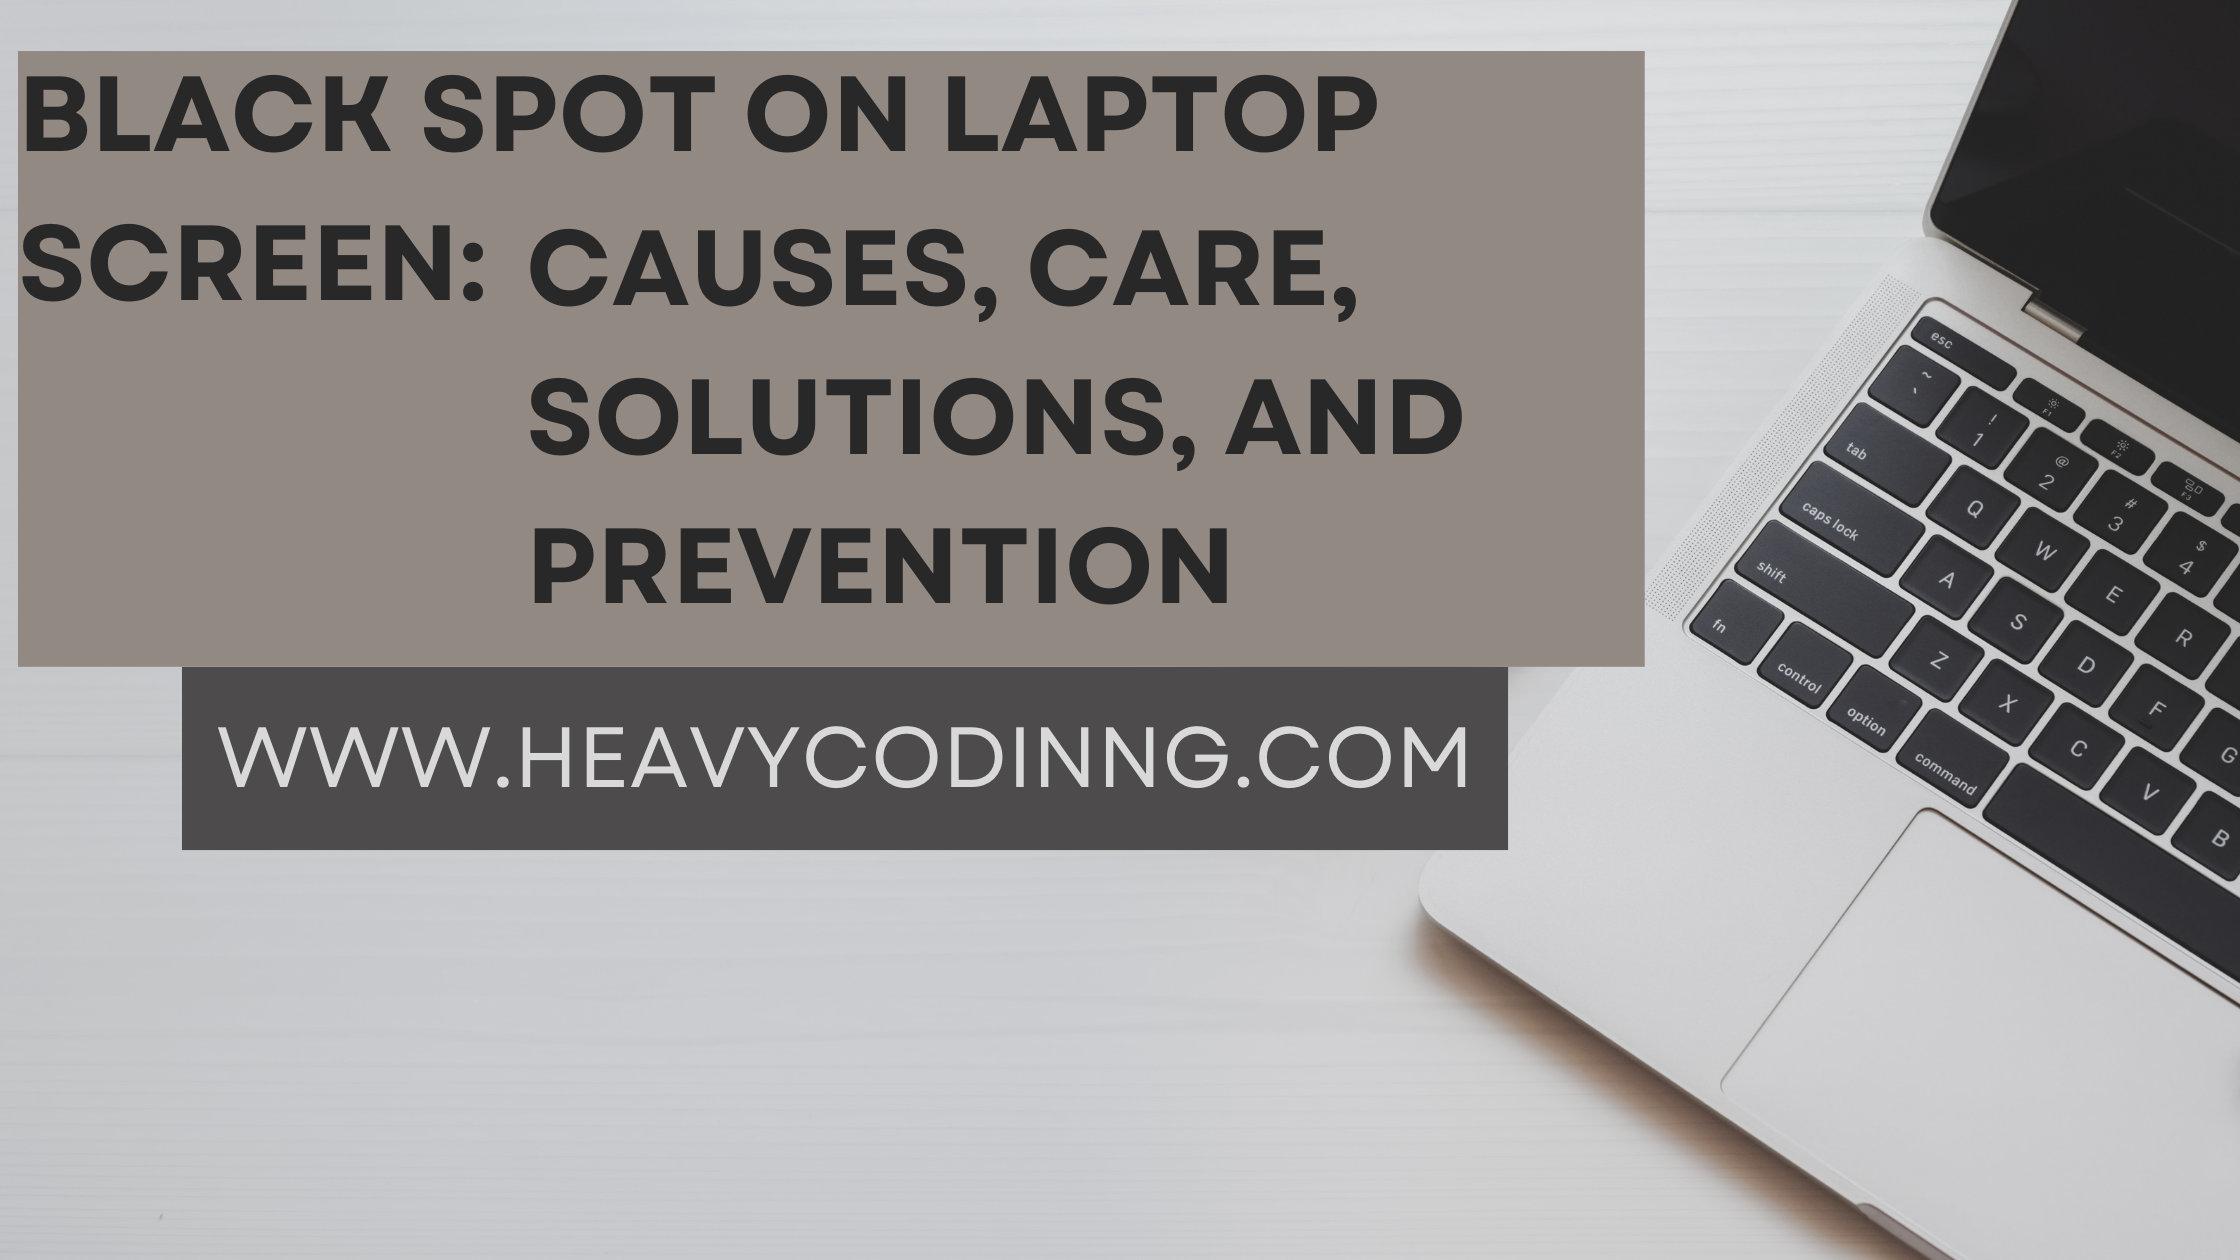 You are currently viewing Black Spot on Laptop Screen: Causes, Care, Solutions, and Prevention